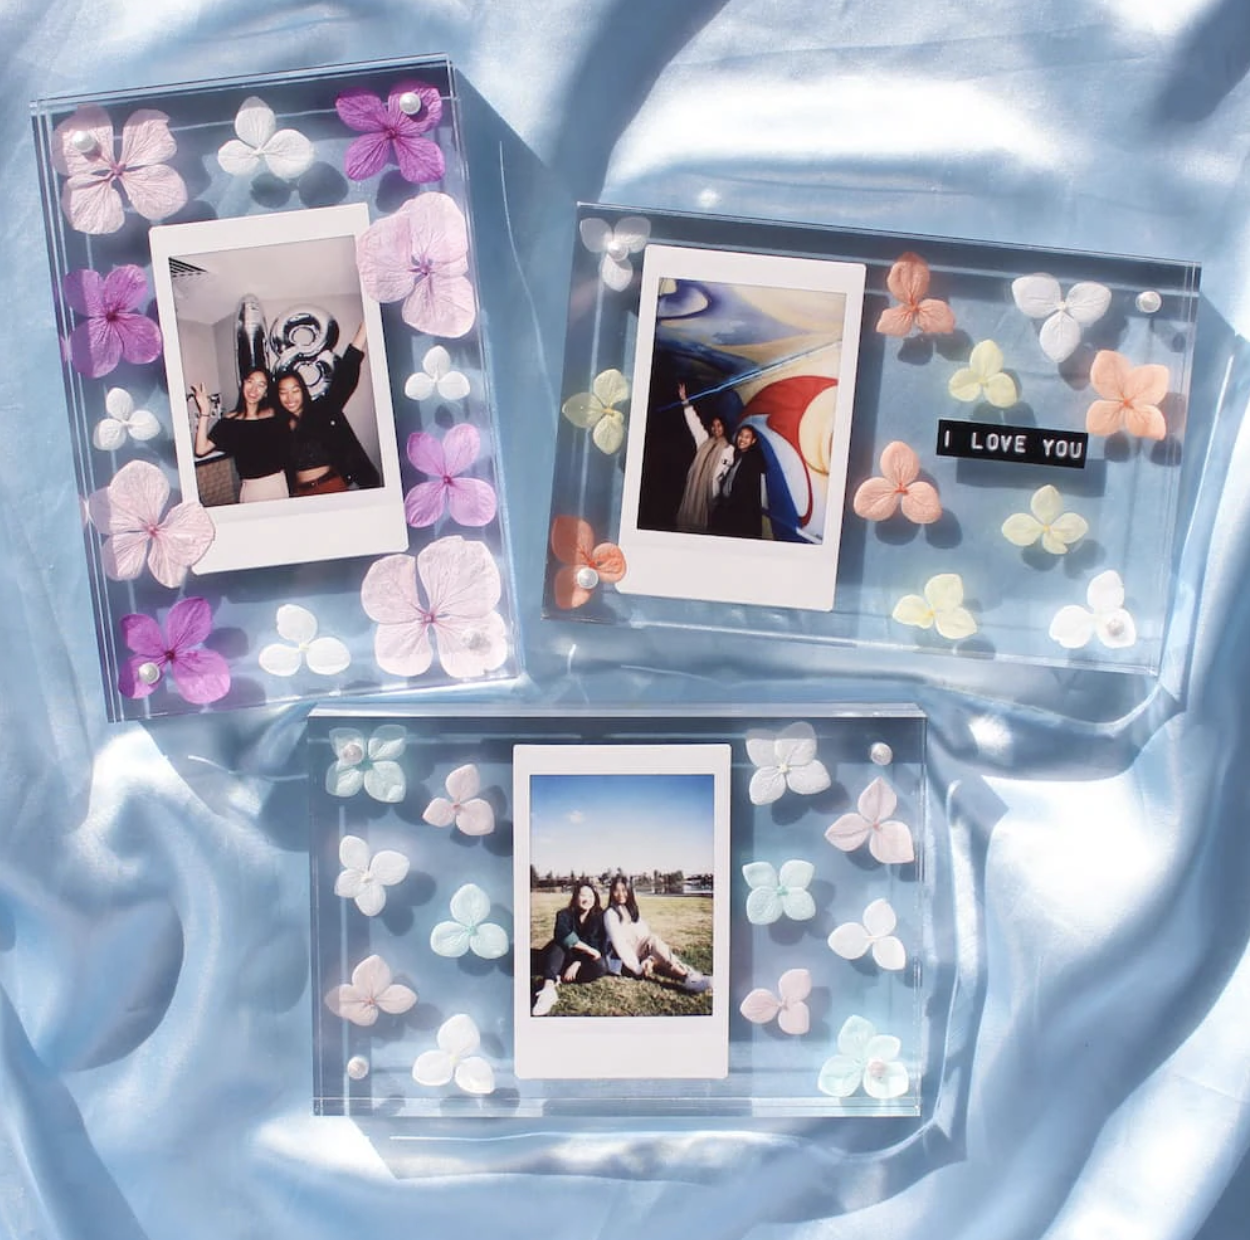 Three personalized picture frames with various flower decorations